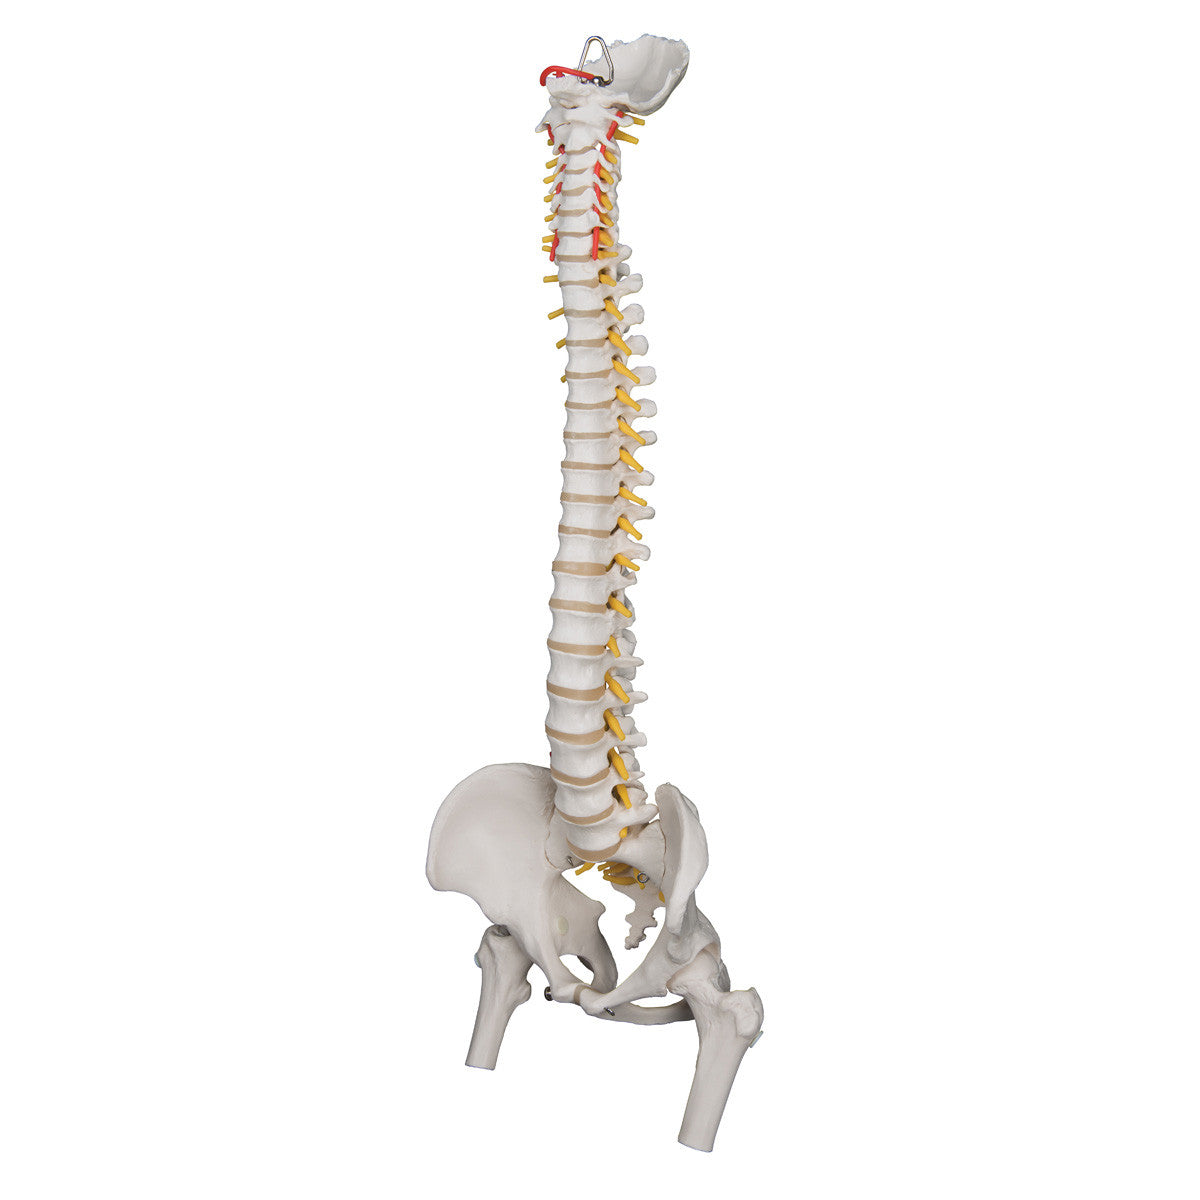 a59-2_03_1200_1200_highly-flexible-human-spine-model-mounted-on-a-flexible-core-with-femur-heads-3b-smart-anatomy__86643.1589753022.1280.1280.jpg